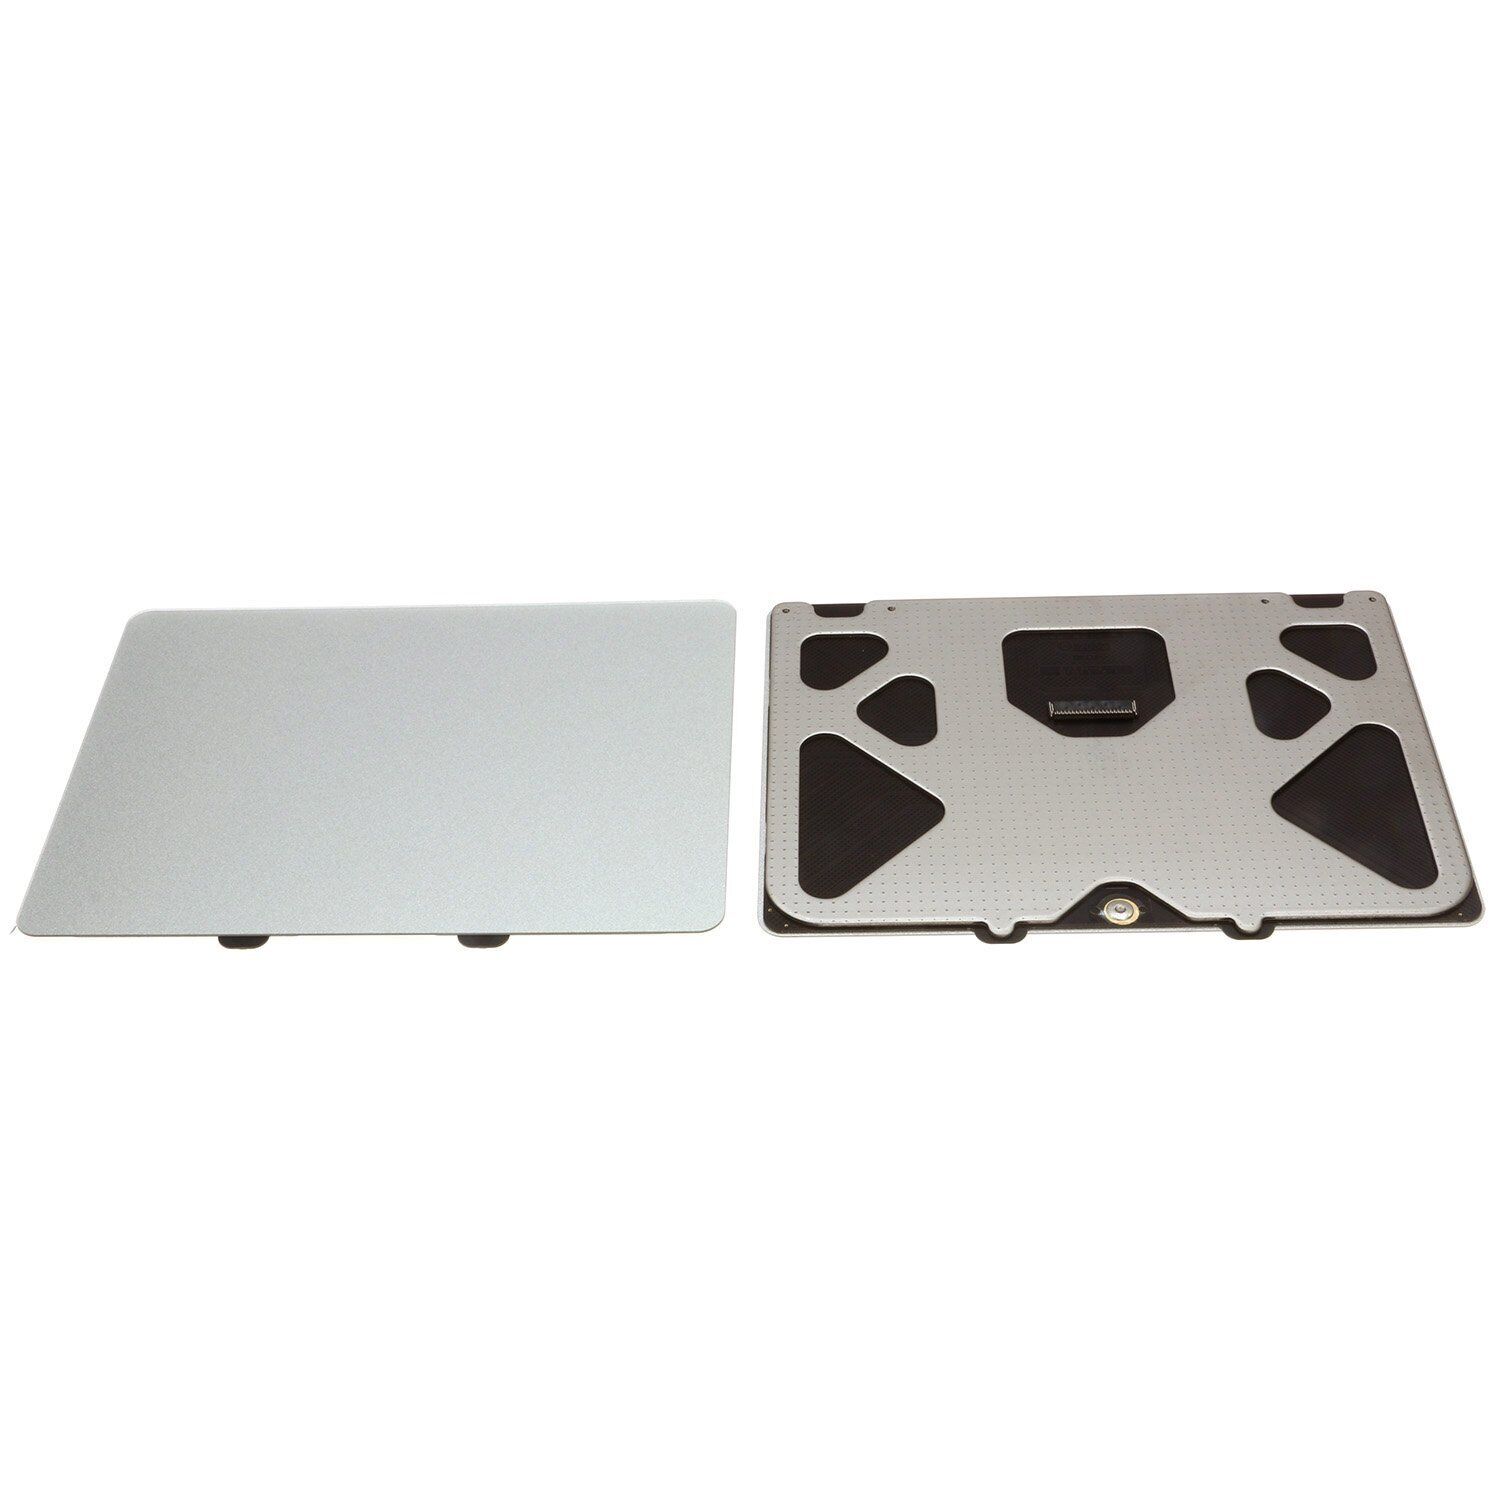 NEW TRACKPAD TOUCHPAD For MacBook Pro A1278 A1286 2009 2010 2011 2012